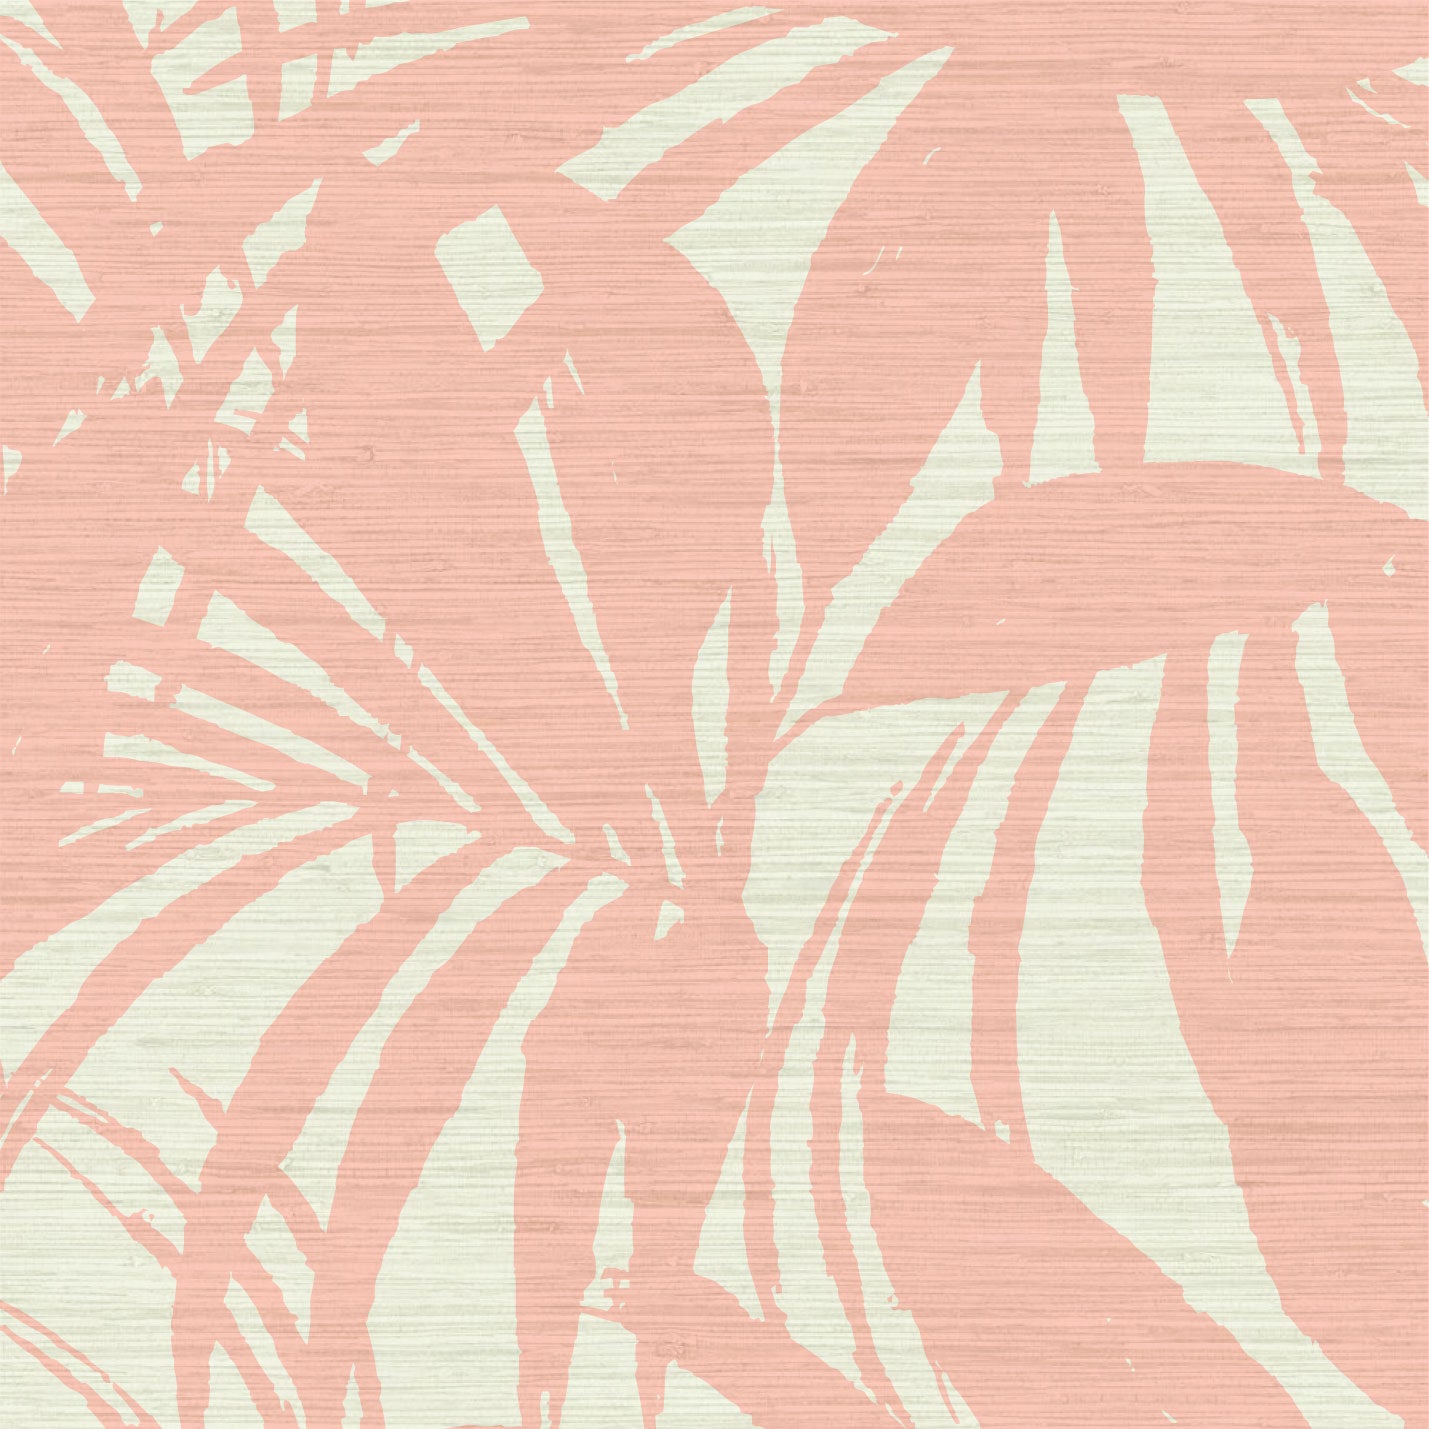 Load image into Gallery viewer, printed grasscloth wallpaper oversize tropical leaf Natural Textured Eco-Friendly Non-toxic High-quality  Sustainable practices Sustainability Interior Design Wall covering Bold retro chic custom jungle garden botanical Seaside Coastal Seashore Waterfront Vacation home styling Retreat Relaxed beach vibes Beach cottage Shoreline Oceanfront white peach pink coral pastel baby orange
